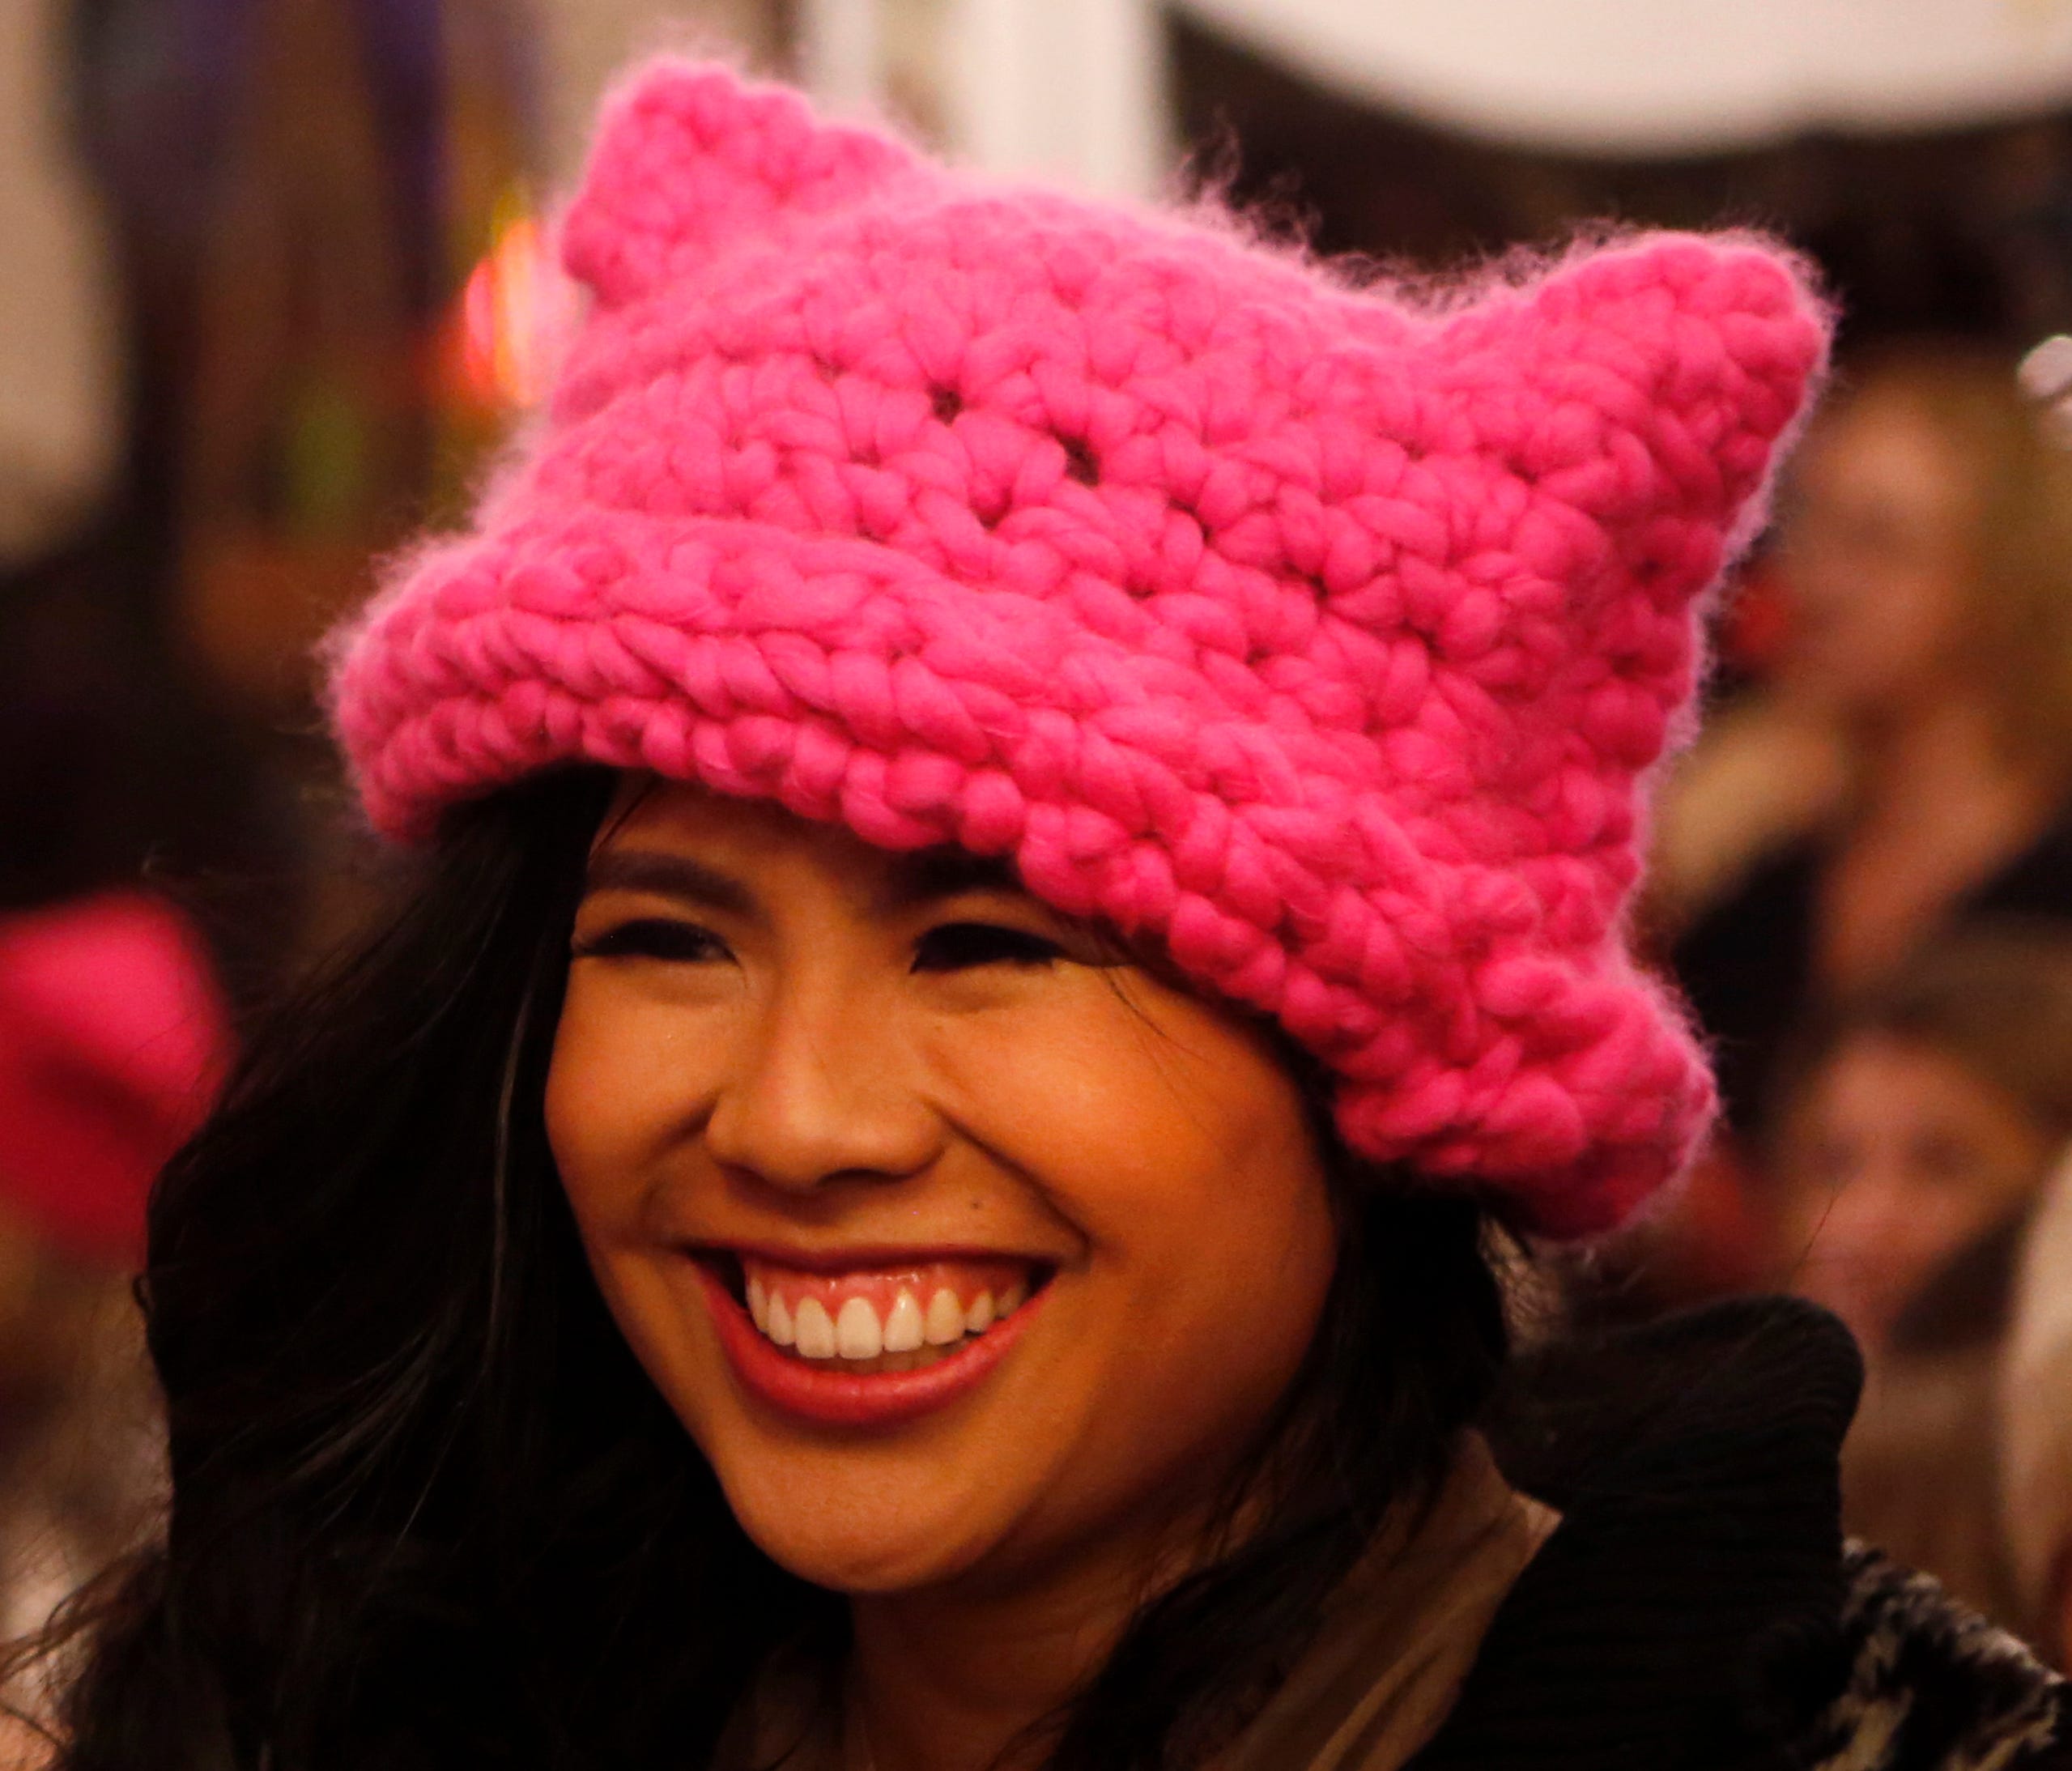 Krista Suh, co-creator of the pussyhat wears one that she knitted on Jan. 6, 2017 at The Little Knittery in Atwater Village, Calif.